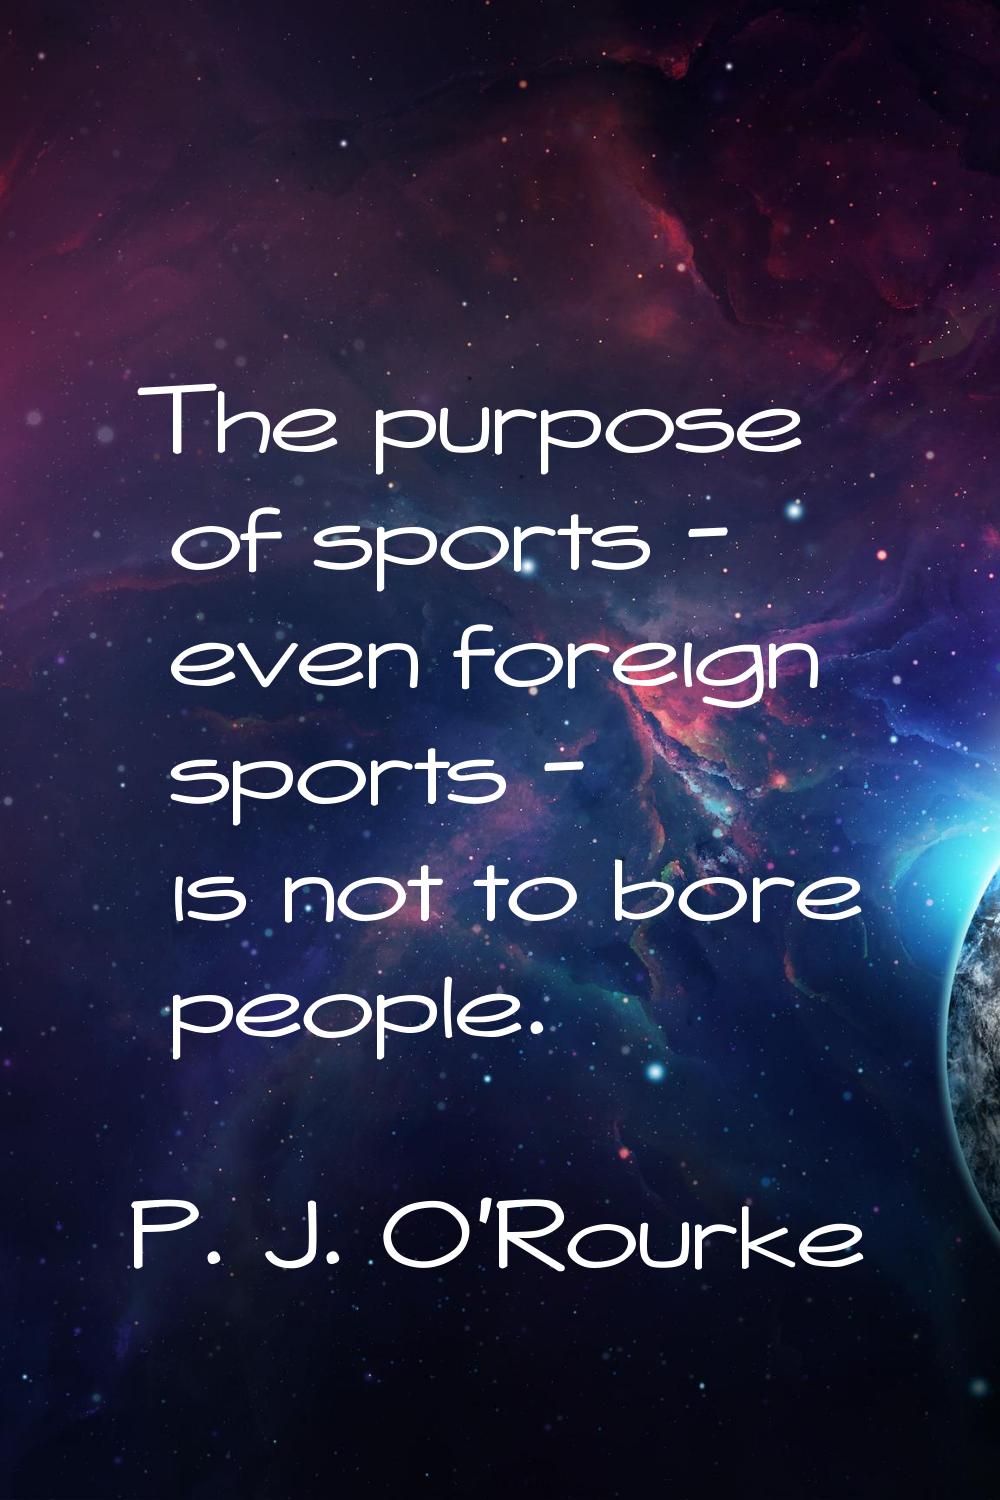 The purpose of sports - even foreign sports - is not to bore people.